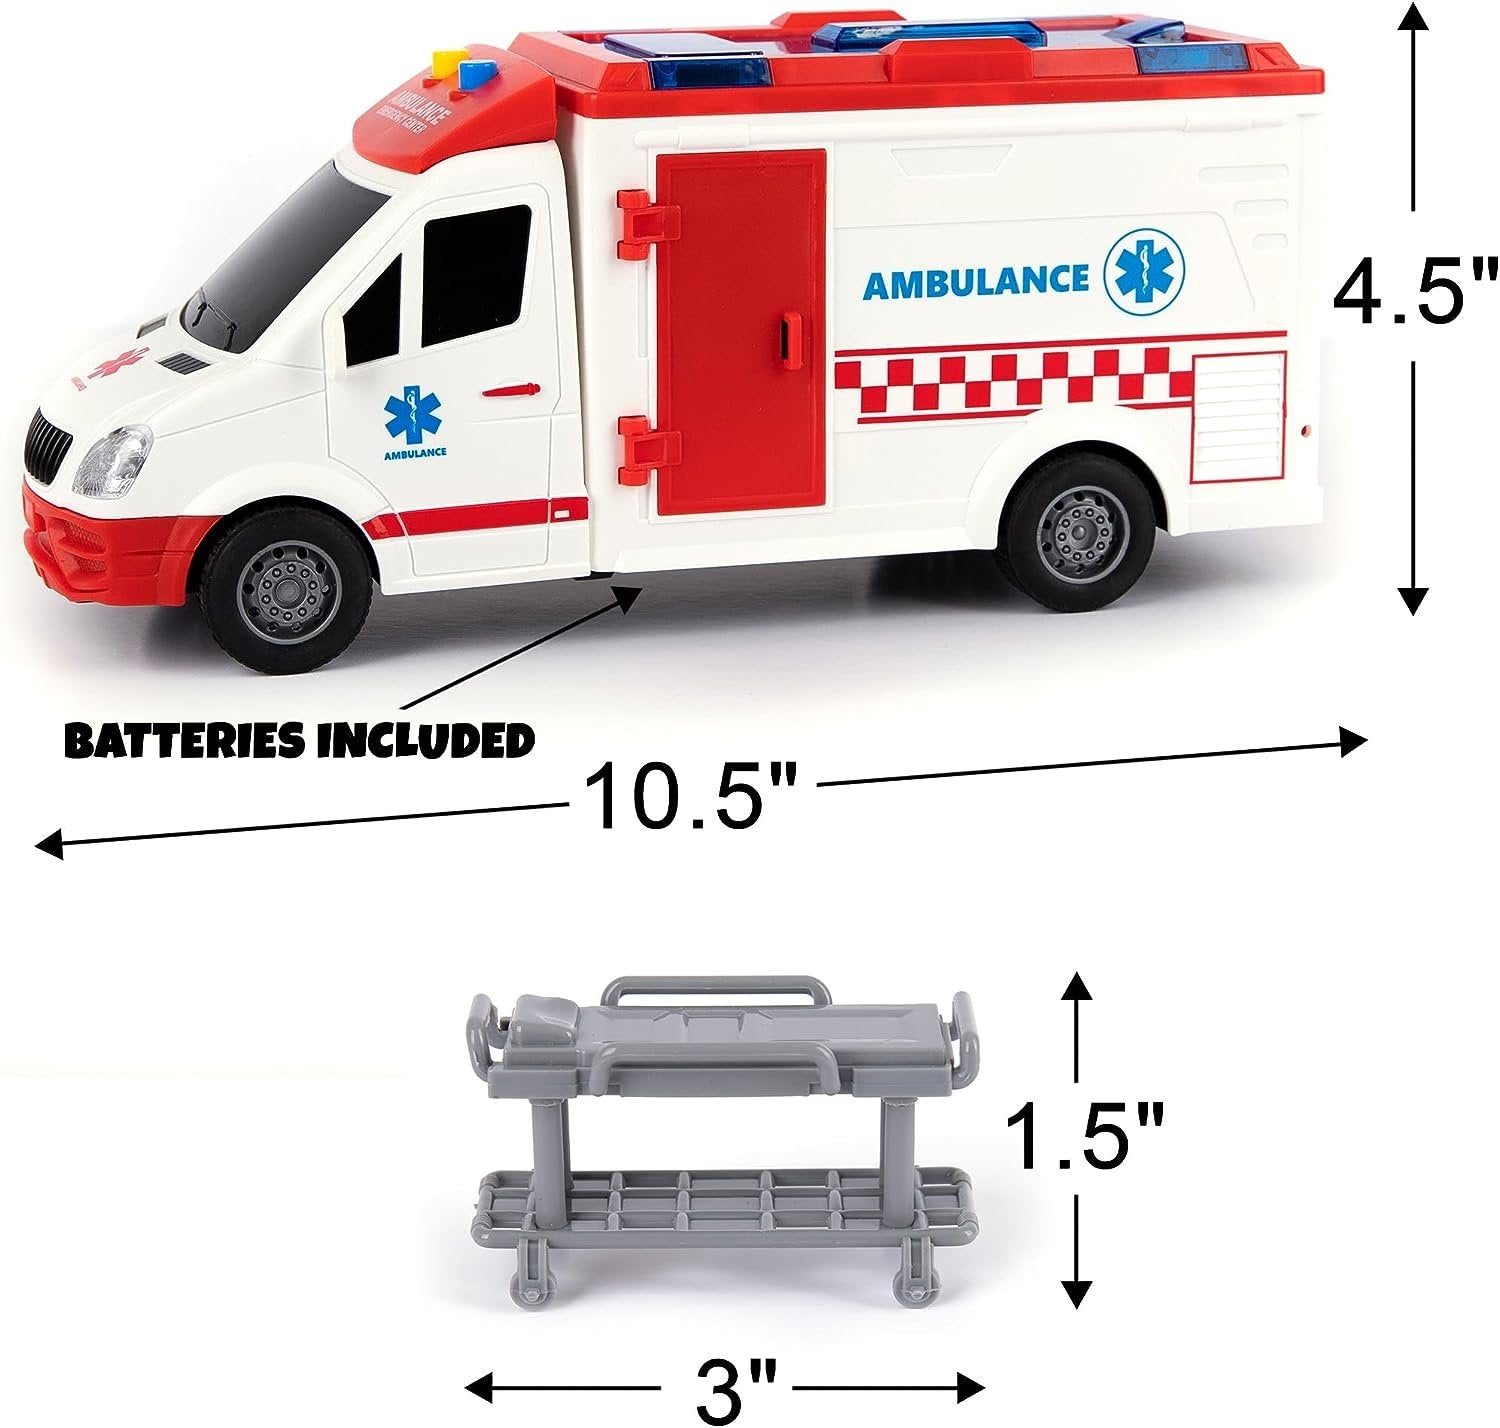 Ambulance Toy Truck for Kids 3,4,5,6,7,8, Lights & Siren, Friction-Powered  1/16 Scale Rescue Toy Ambulance, Emergency Vehicle Toys with Removable 